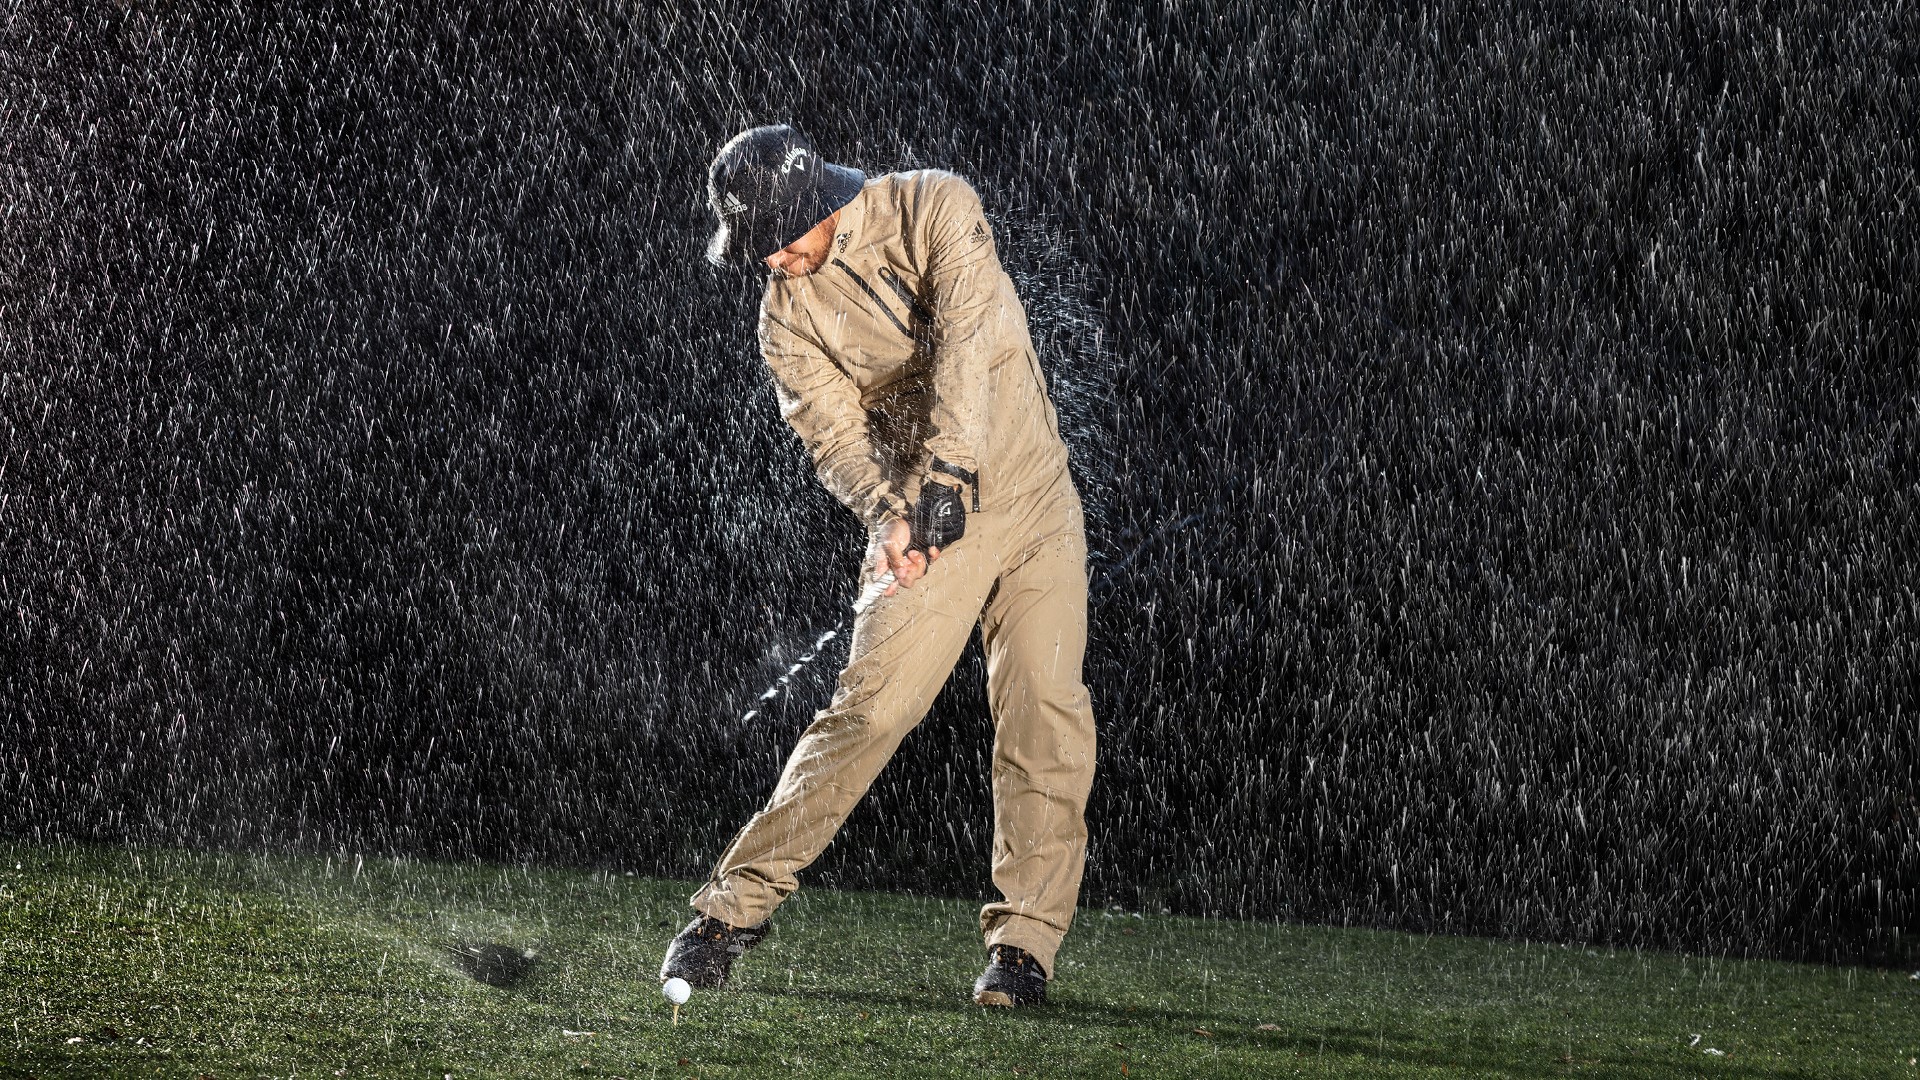 Take on the Elements (Quietly) with All-New RAIN.RDY Gear